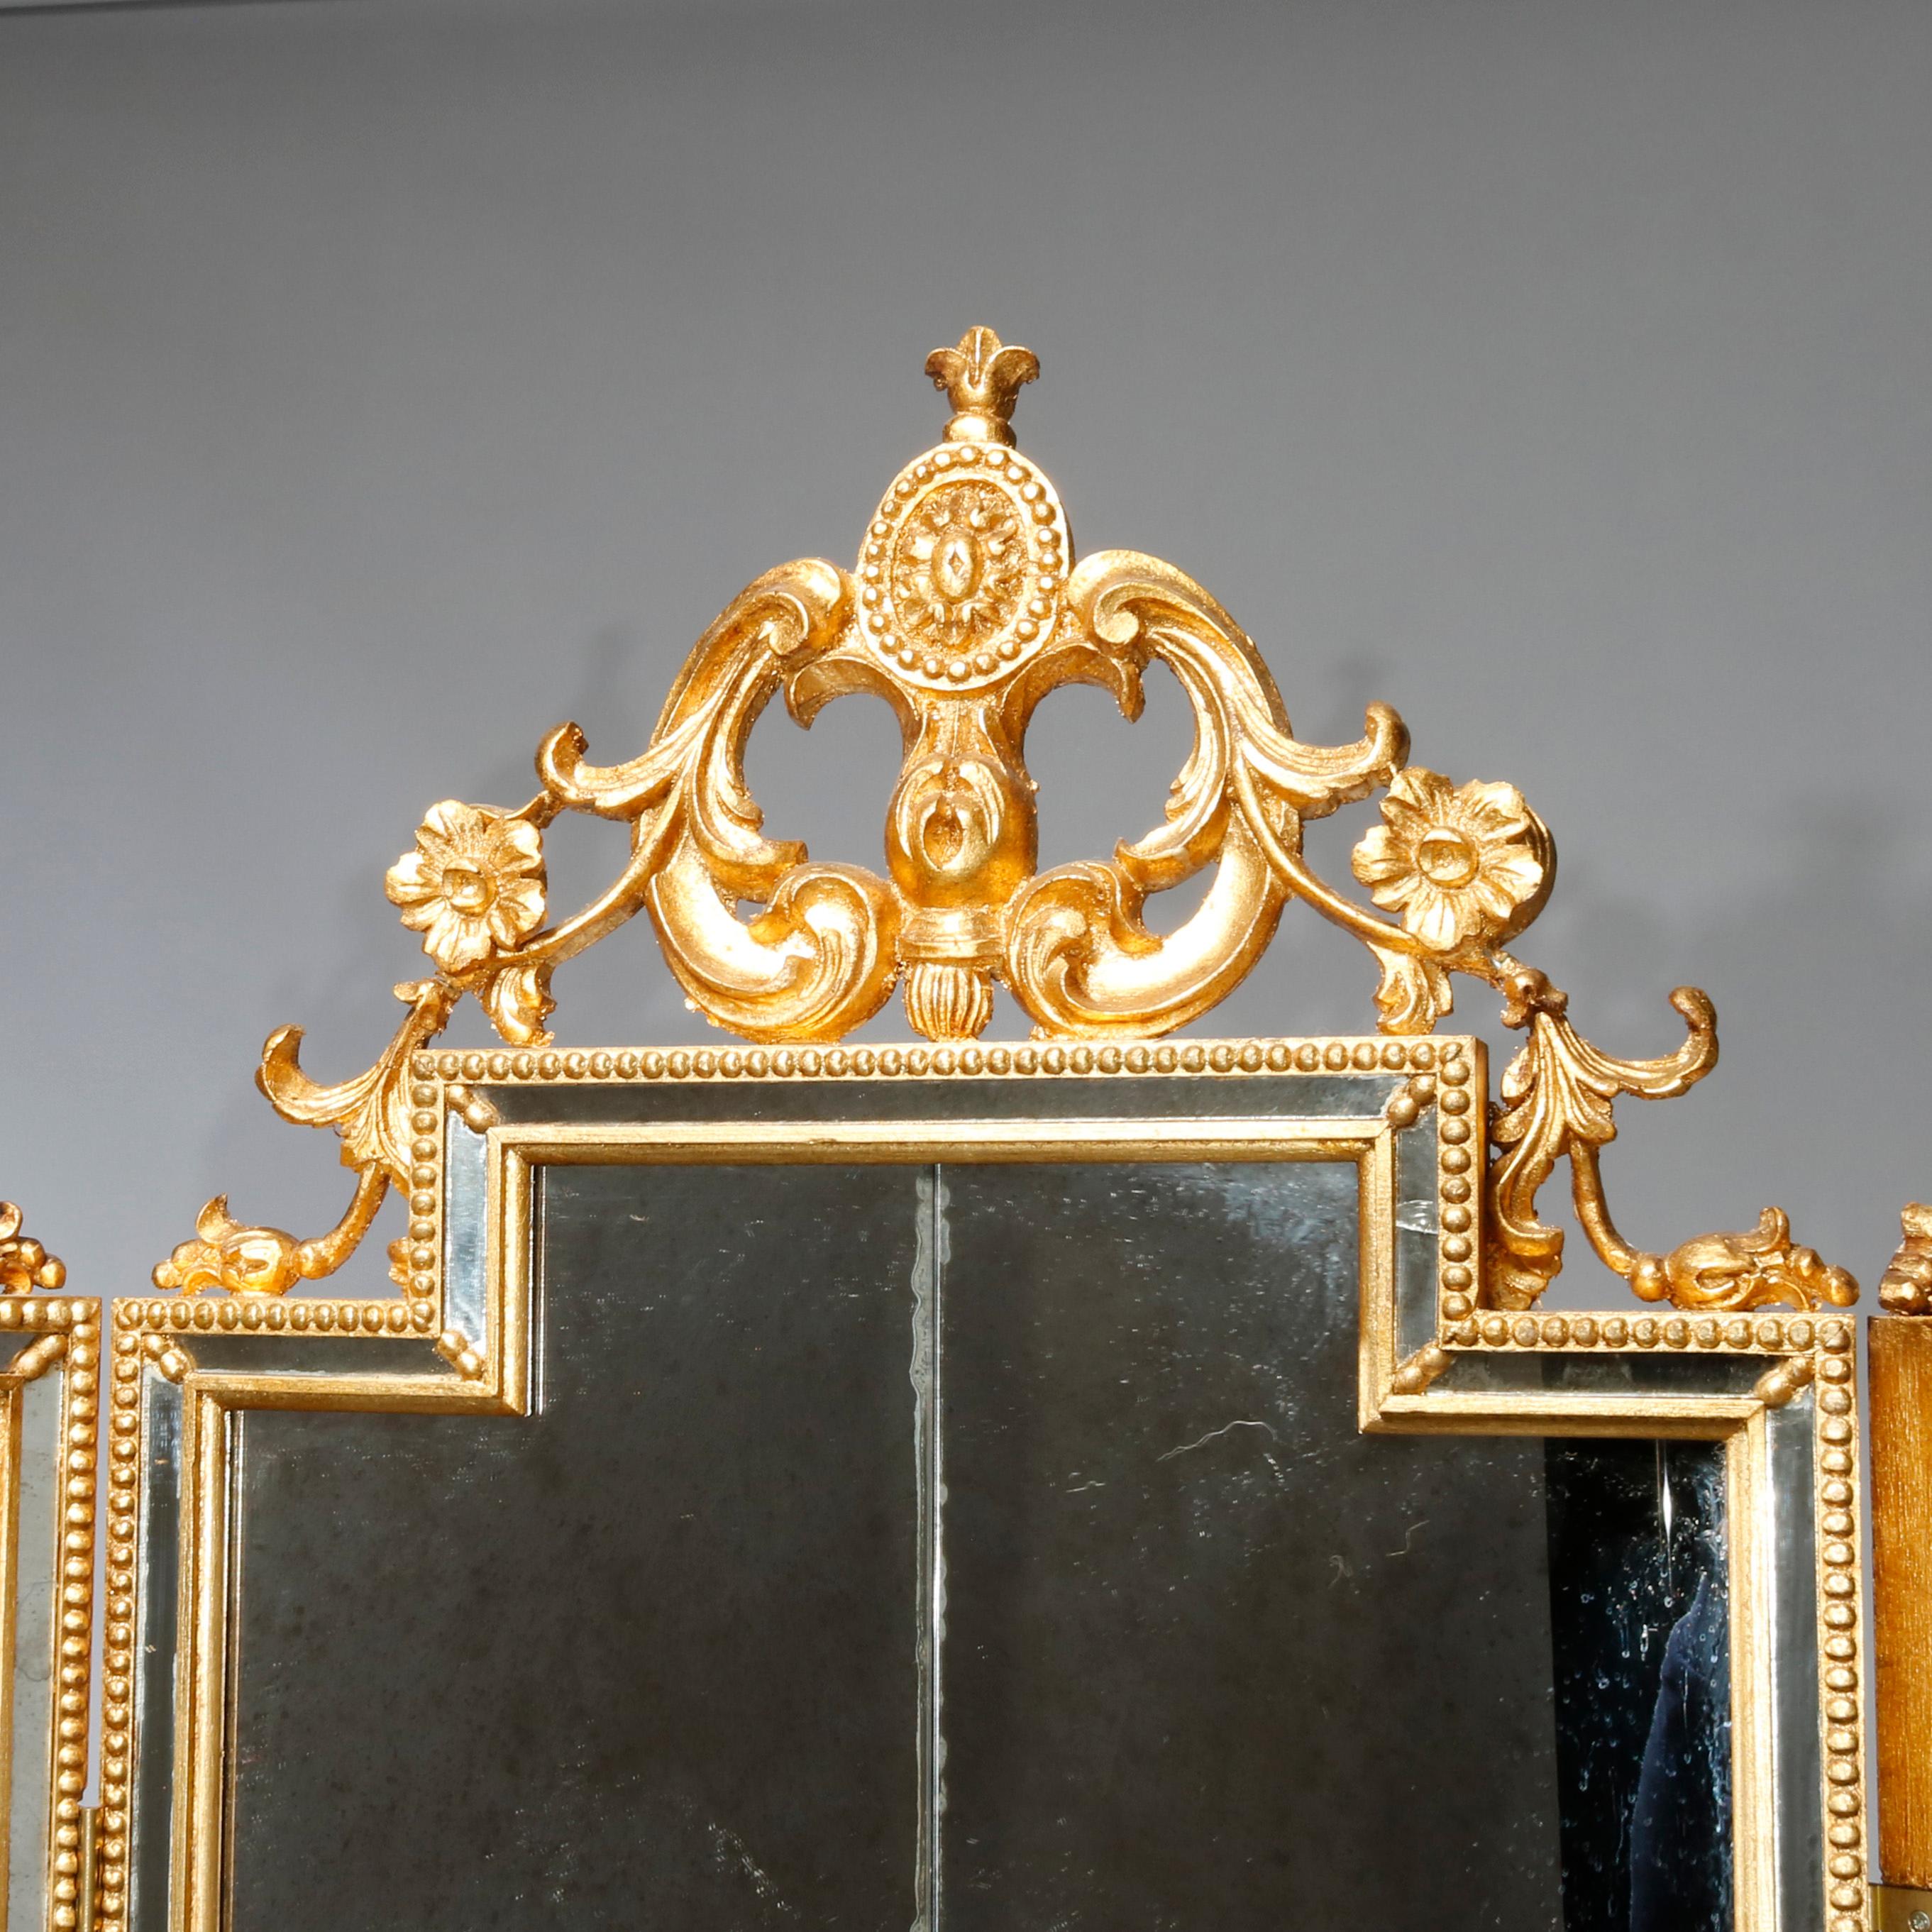 An antique French Louis XIV style dressing screen by LaBarge offers a carved and pierced giltwood frame with crest having central medallion and flanking scroll and foliate elements over paneled mirror glass section having beaded trim, original label